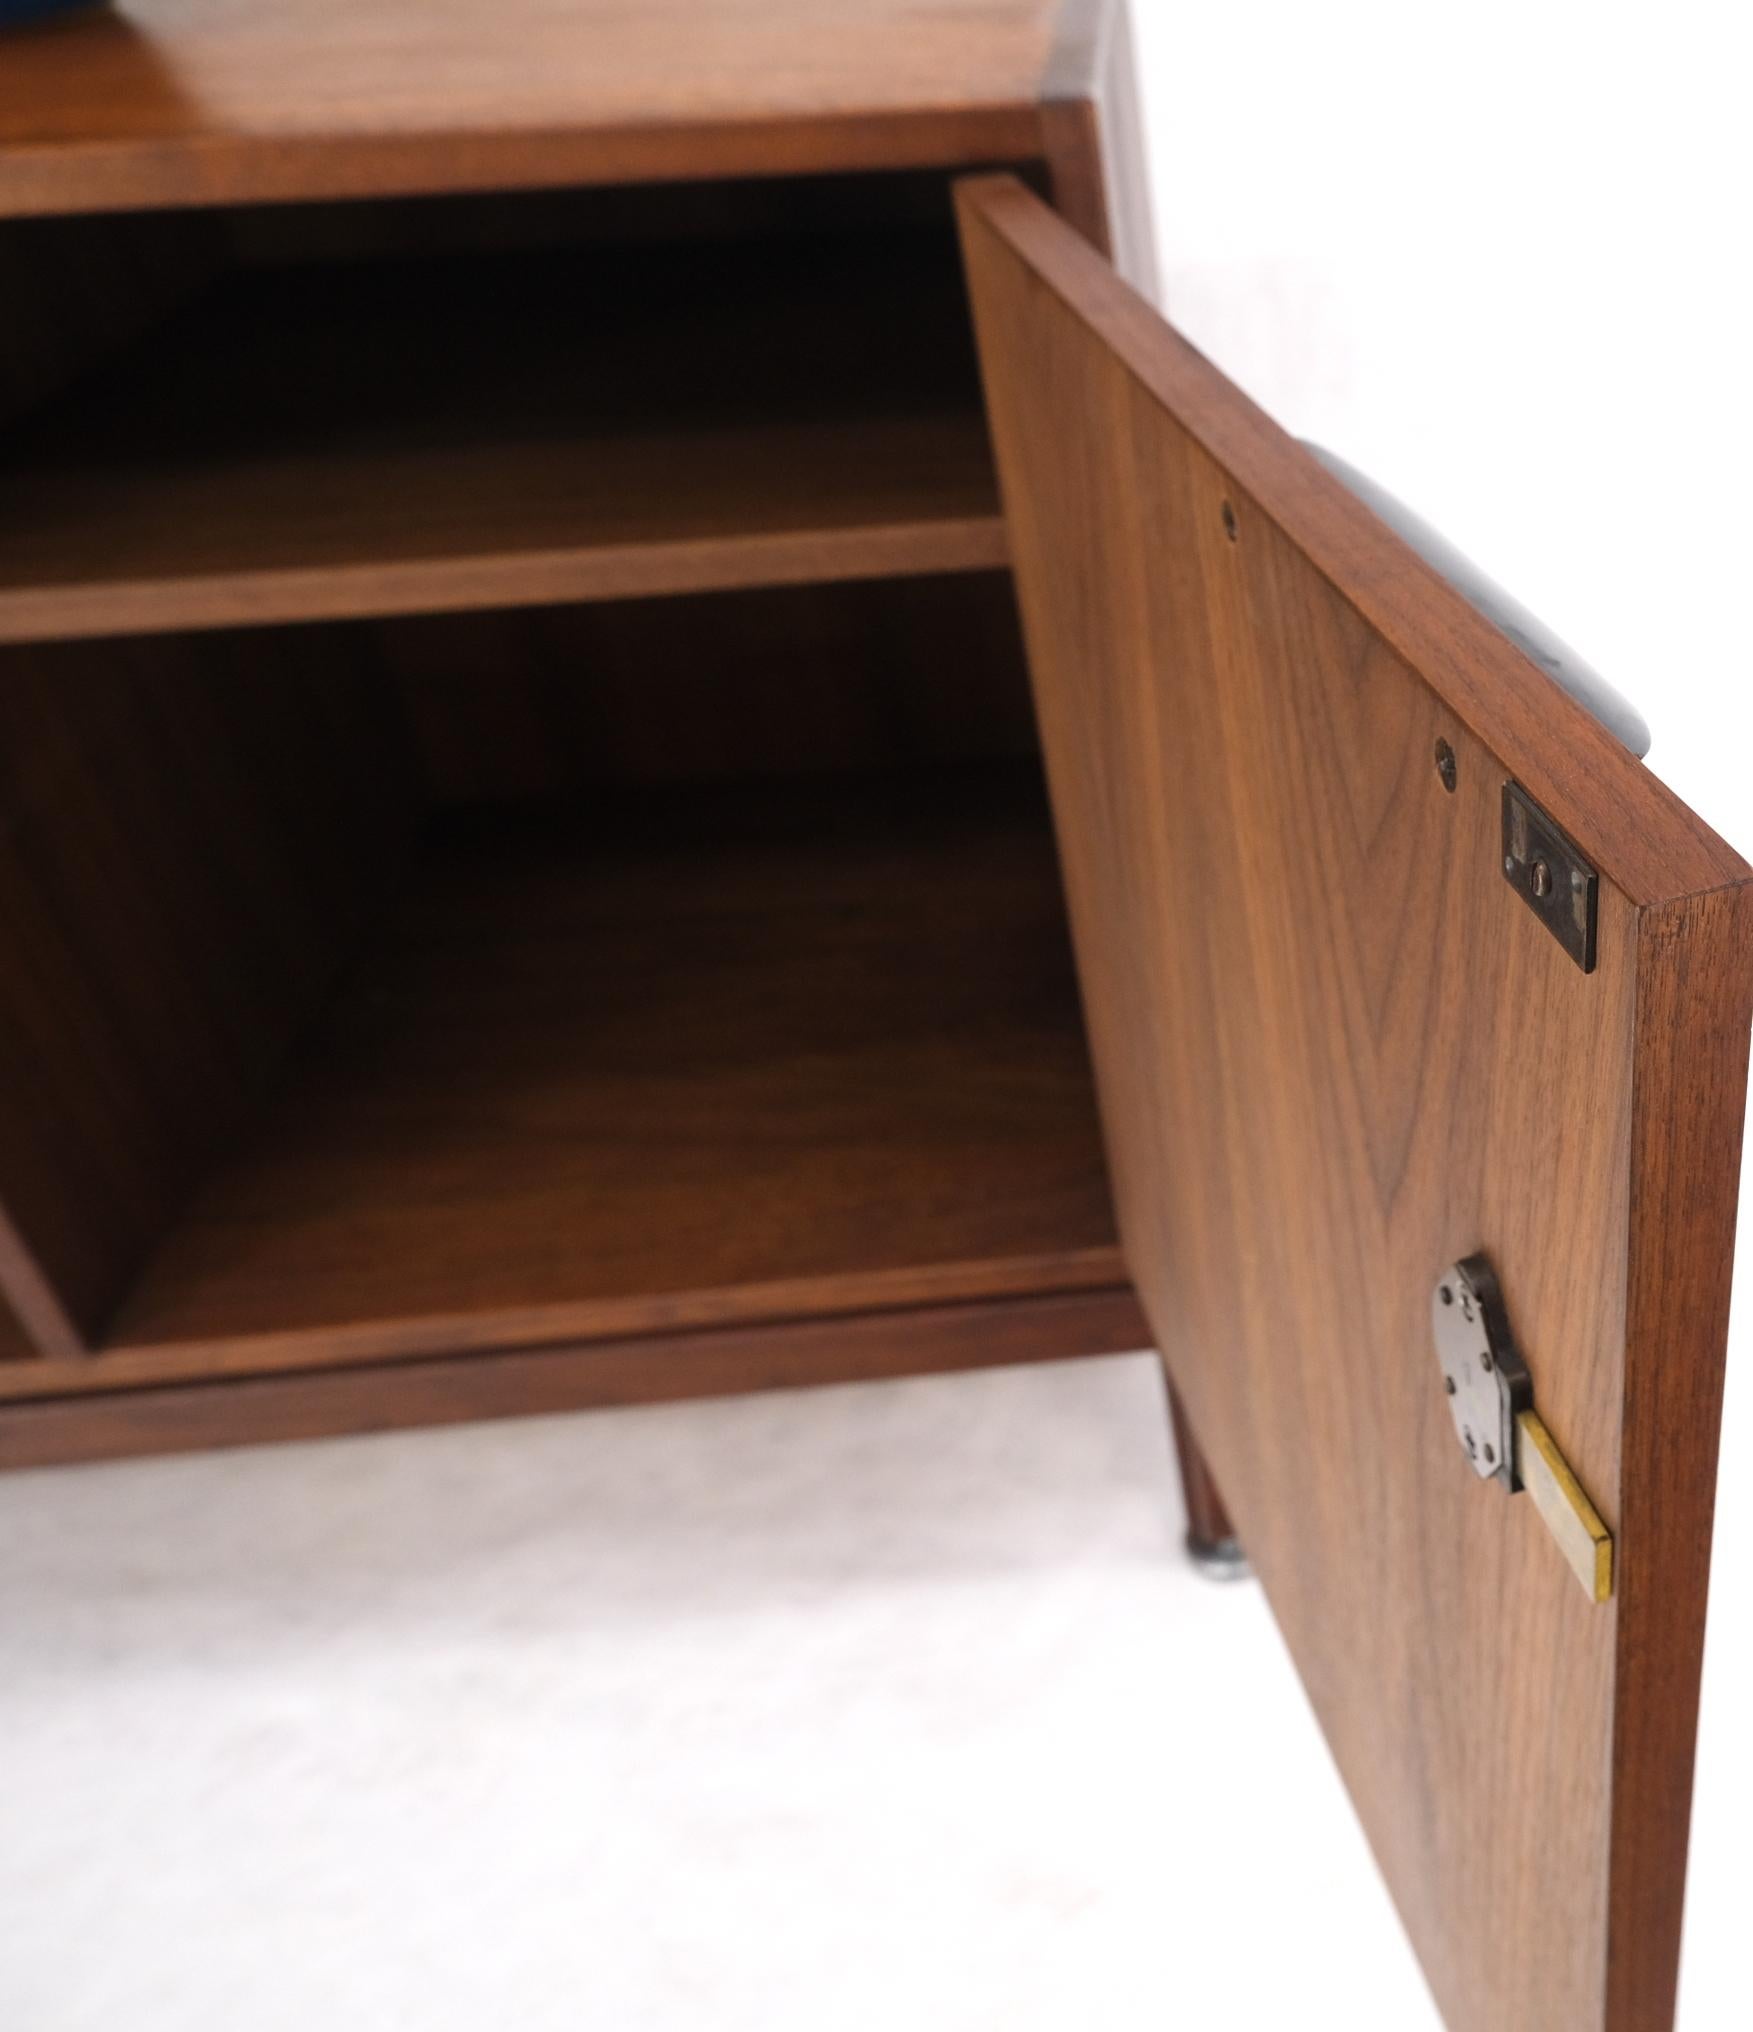 Oiled Jens Risom Small One Double Door Compartment Credenza Cabinet Adjustable Shelves